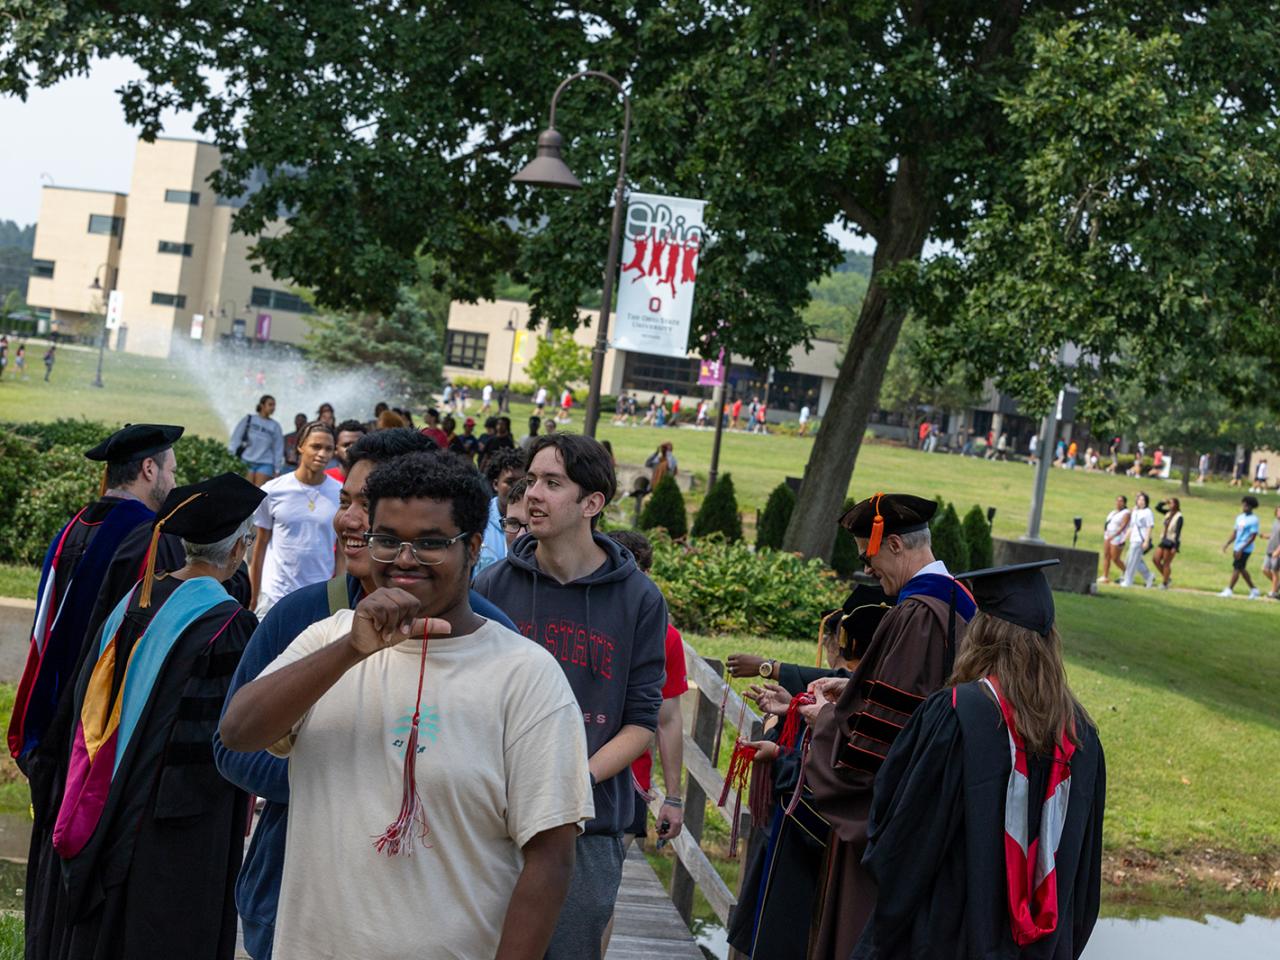 A student holds up the tassel he received after participating in the bridge walk while students are lined up behind him.